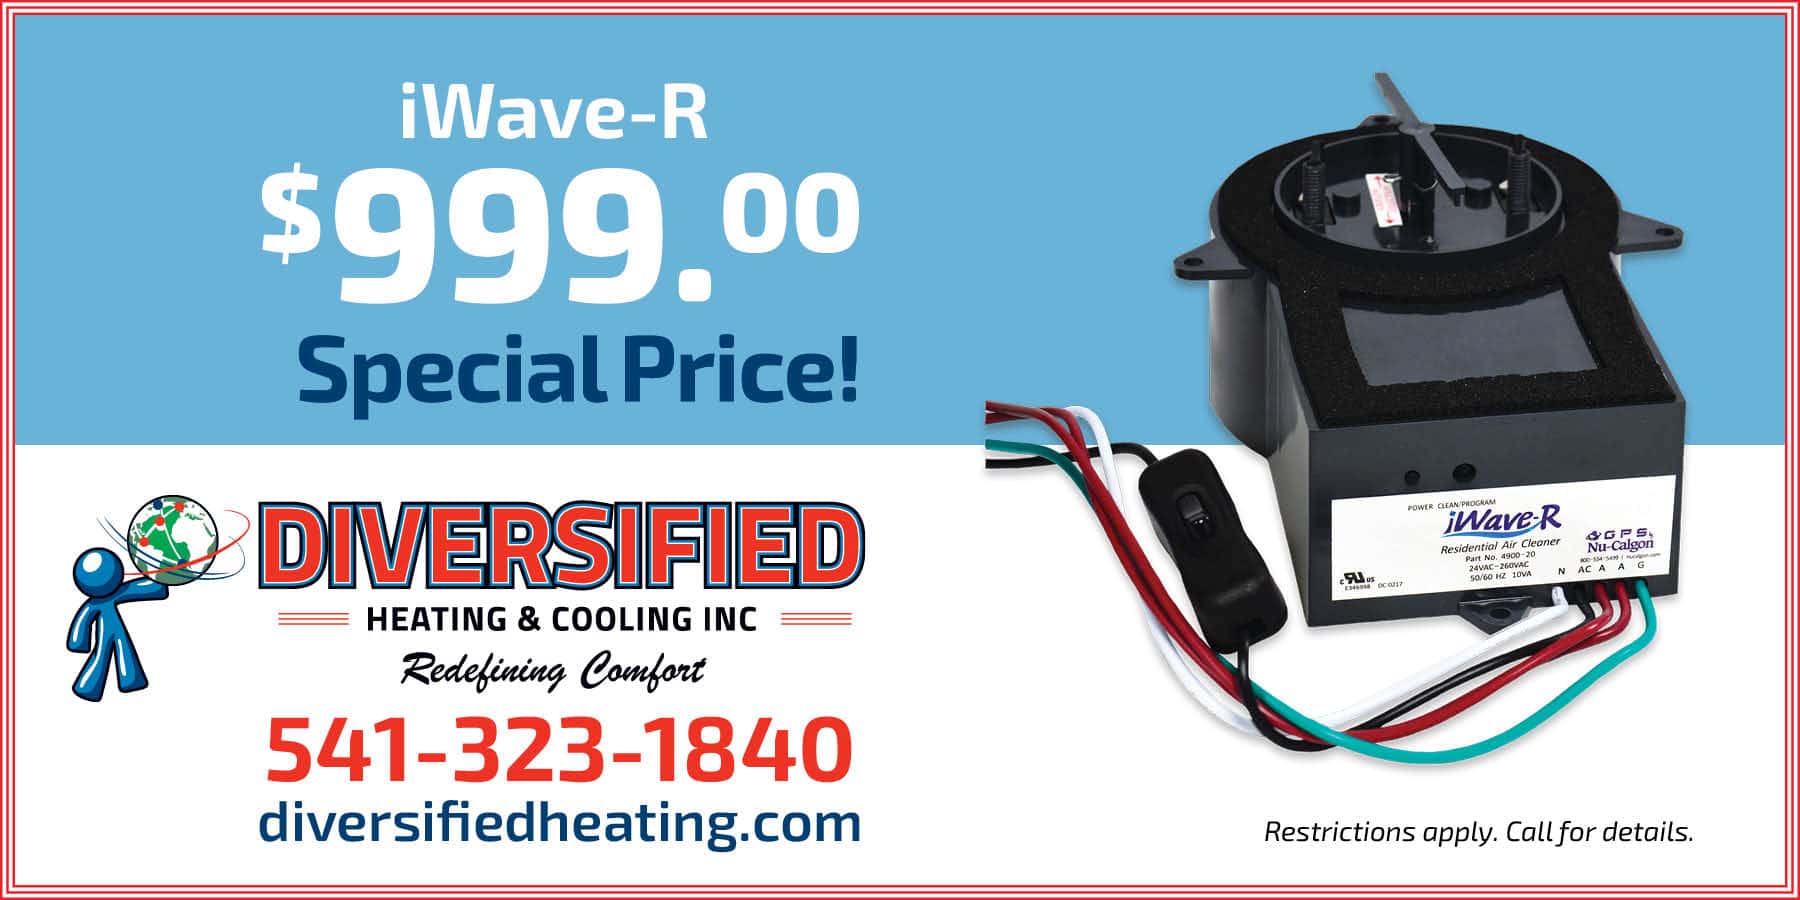 iWave-R 9.00 special price